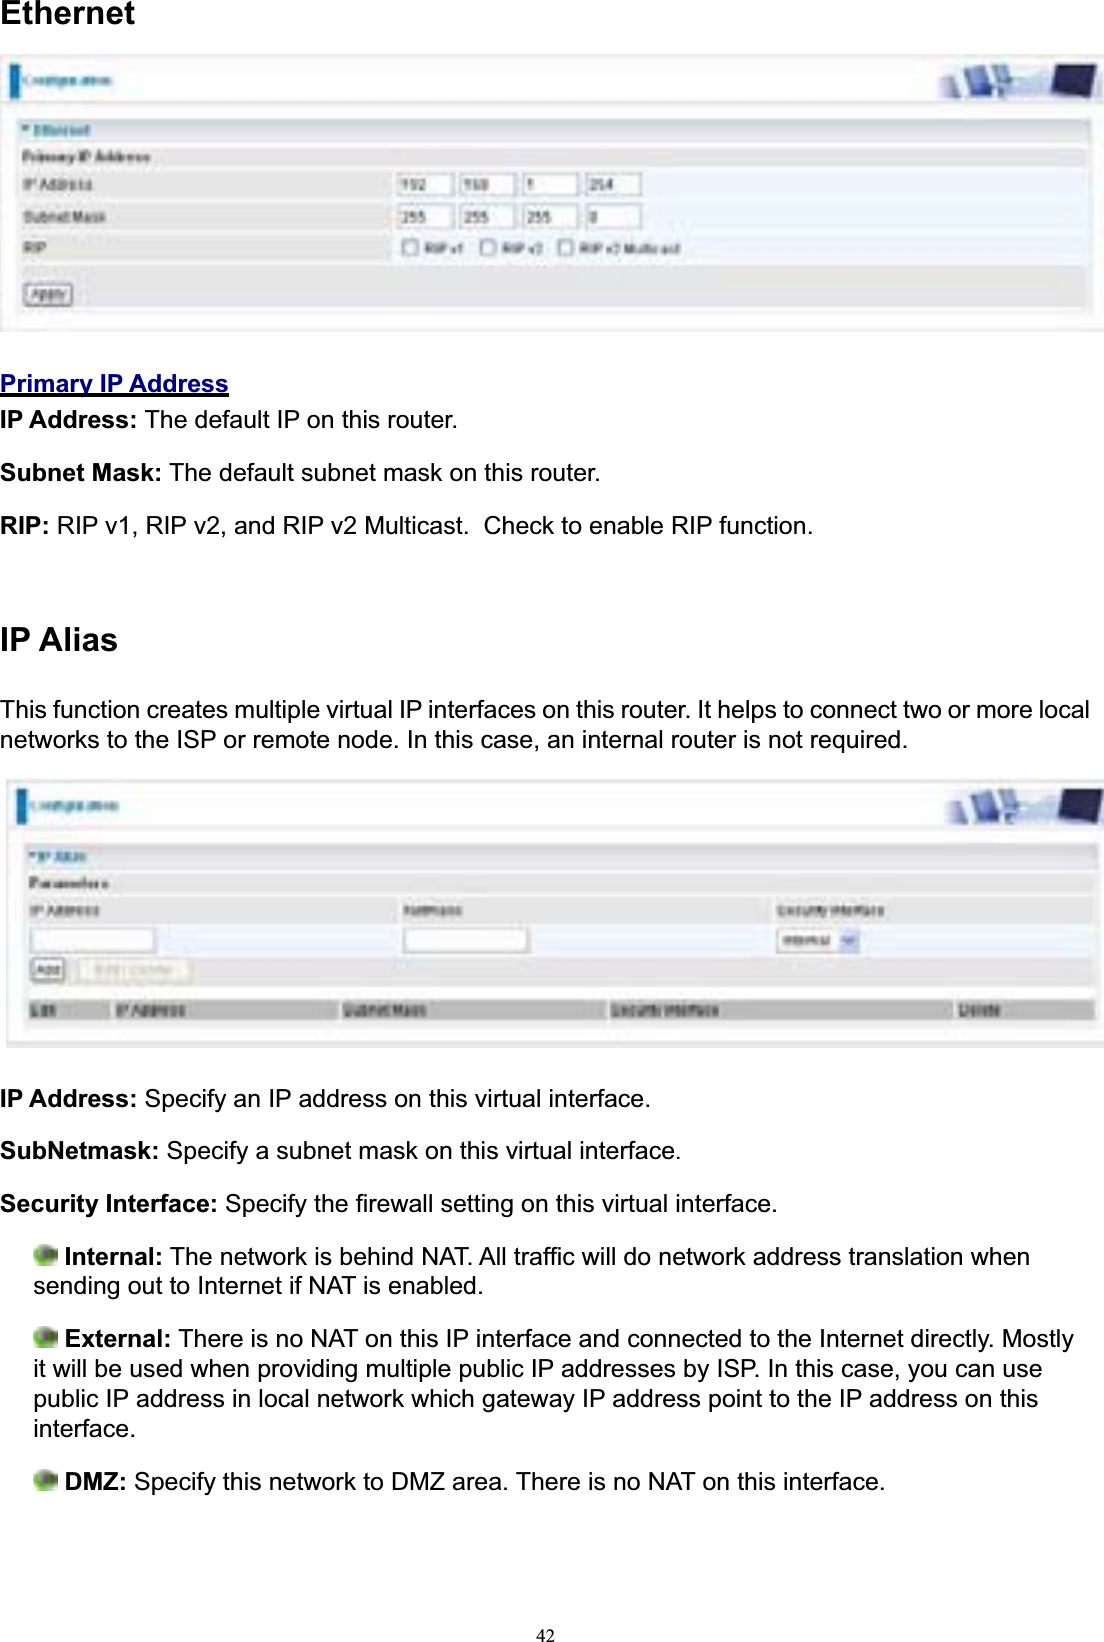 42EthernetPrimary IP AddressIP Address: The default IP on this router. Subnet Mask: The default subnet mask on this router. RIP: RIP v1, RIP v2, and RIP v2 Multicast.  Check to enable RIP function. IP AliasThis function creates multiple virtual IP interfaces on this router. It helps to connect two or more local networks to the ISP or remote node. In this case, an internal router is not required. IP Address: Specify an IP address on this virtual interface. SubNetmask: Specify a subnet mask on this virtual interface.Security Interface: Specify the firewall setting on this virtual interface. Internal: The network is behind NAT. All traffic will do network address translation when sending out to Internet if NAT is enabled. External: There is no NAT on this IP interface and connected to the Internet directly. Mostly it will be used when providing multiple public IP addresses by ISP. In this case, you can use public IP address in local network which gateway IP address point to the IP address on this interface.DMZ: Specify this network to DMZ area. There is no NAT on this interface. 